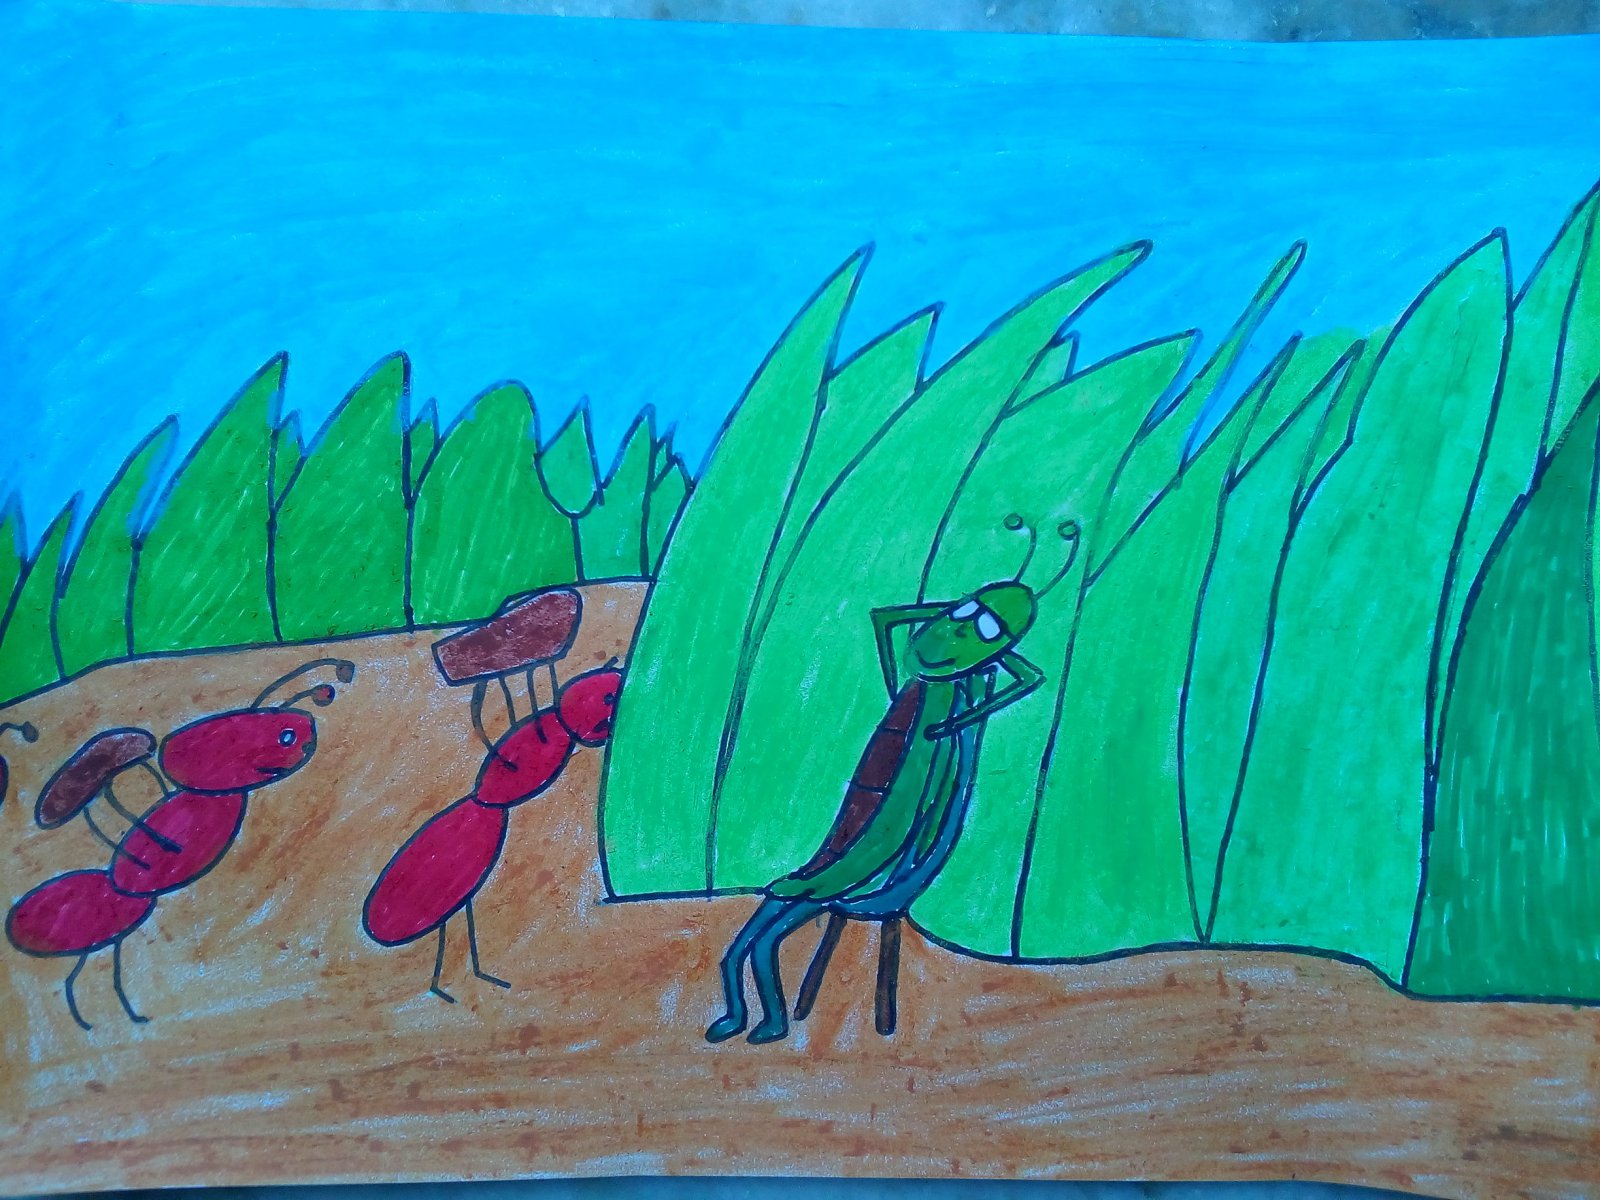 THE STORY OF ANT AND THE GRASSHOPPER ( the painting is based on the ant and the grasshopper. The moral of the story is work hard and you will get reward in the future). - JOHN ( JOHN ART Gallery 2019).